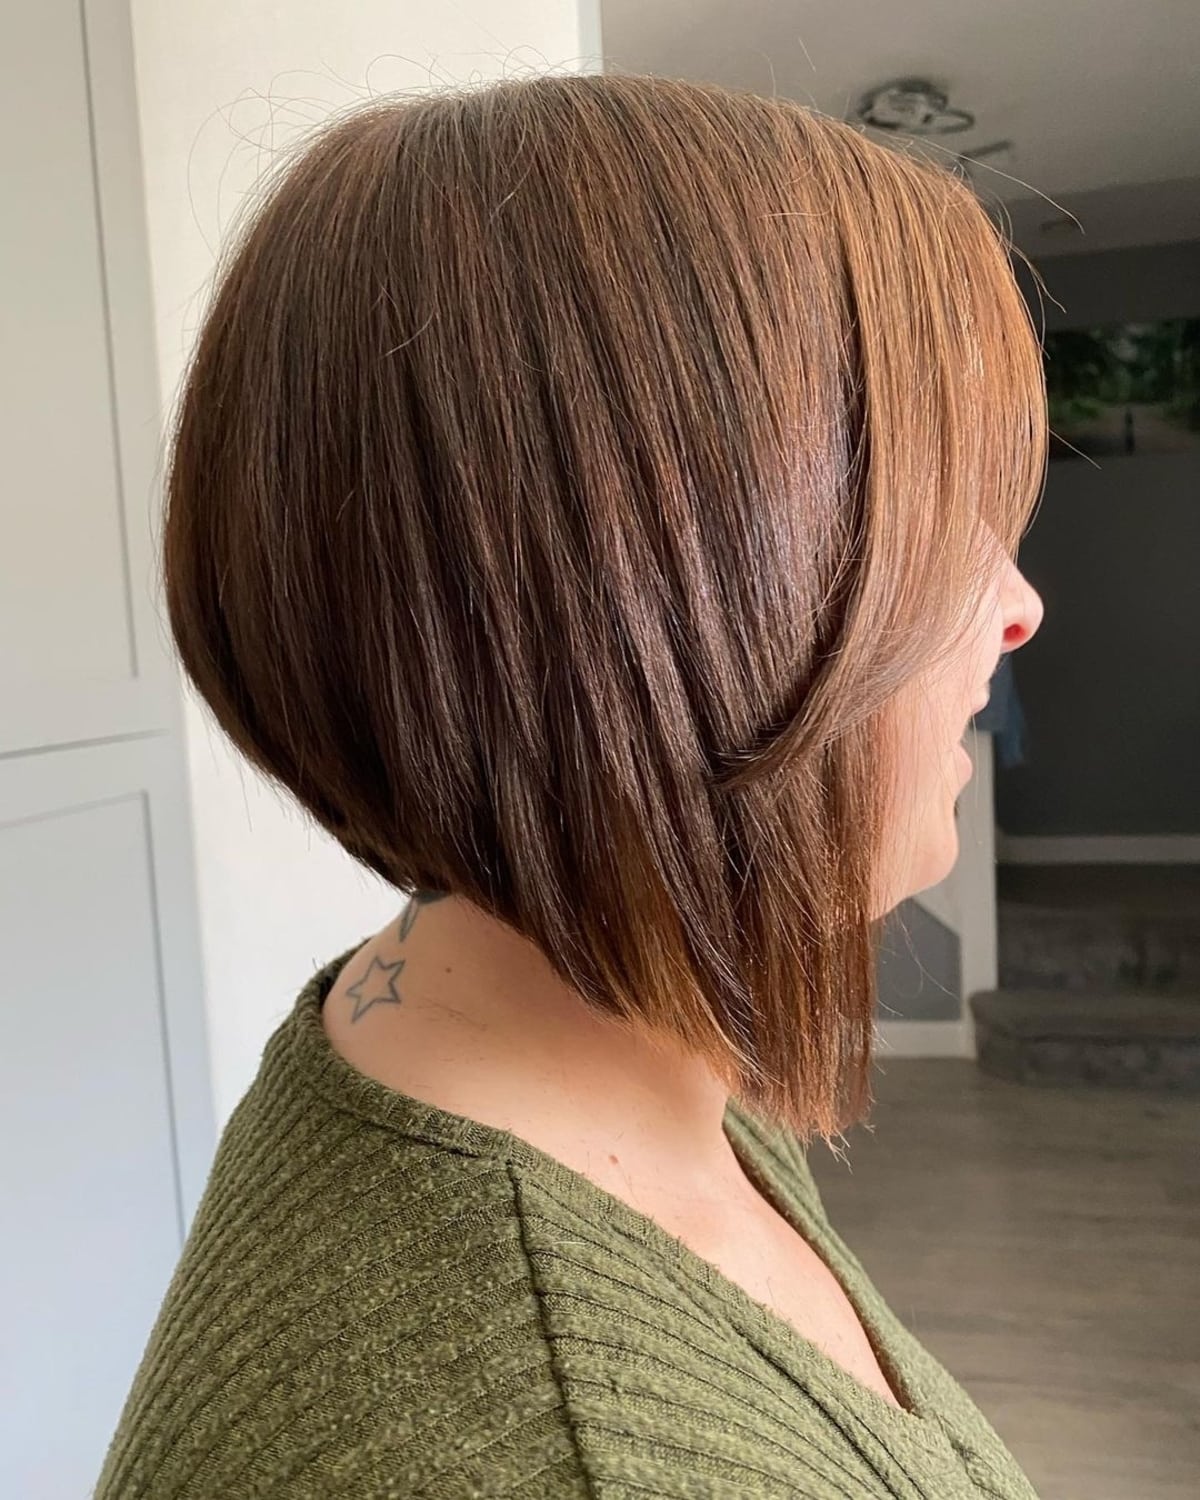 Graduated bob with side bangs